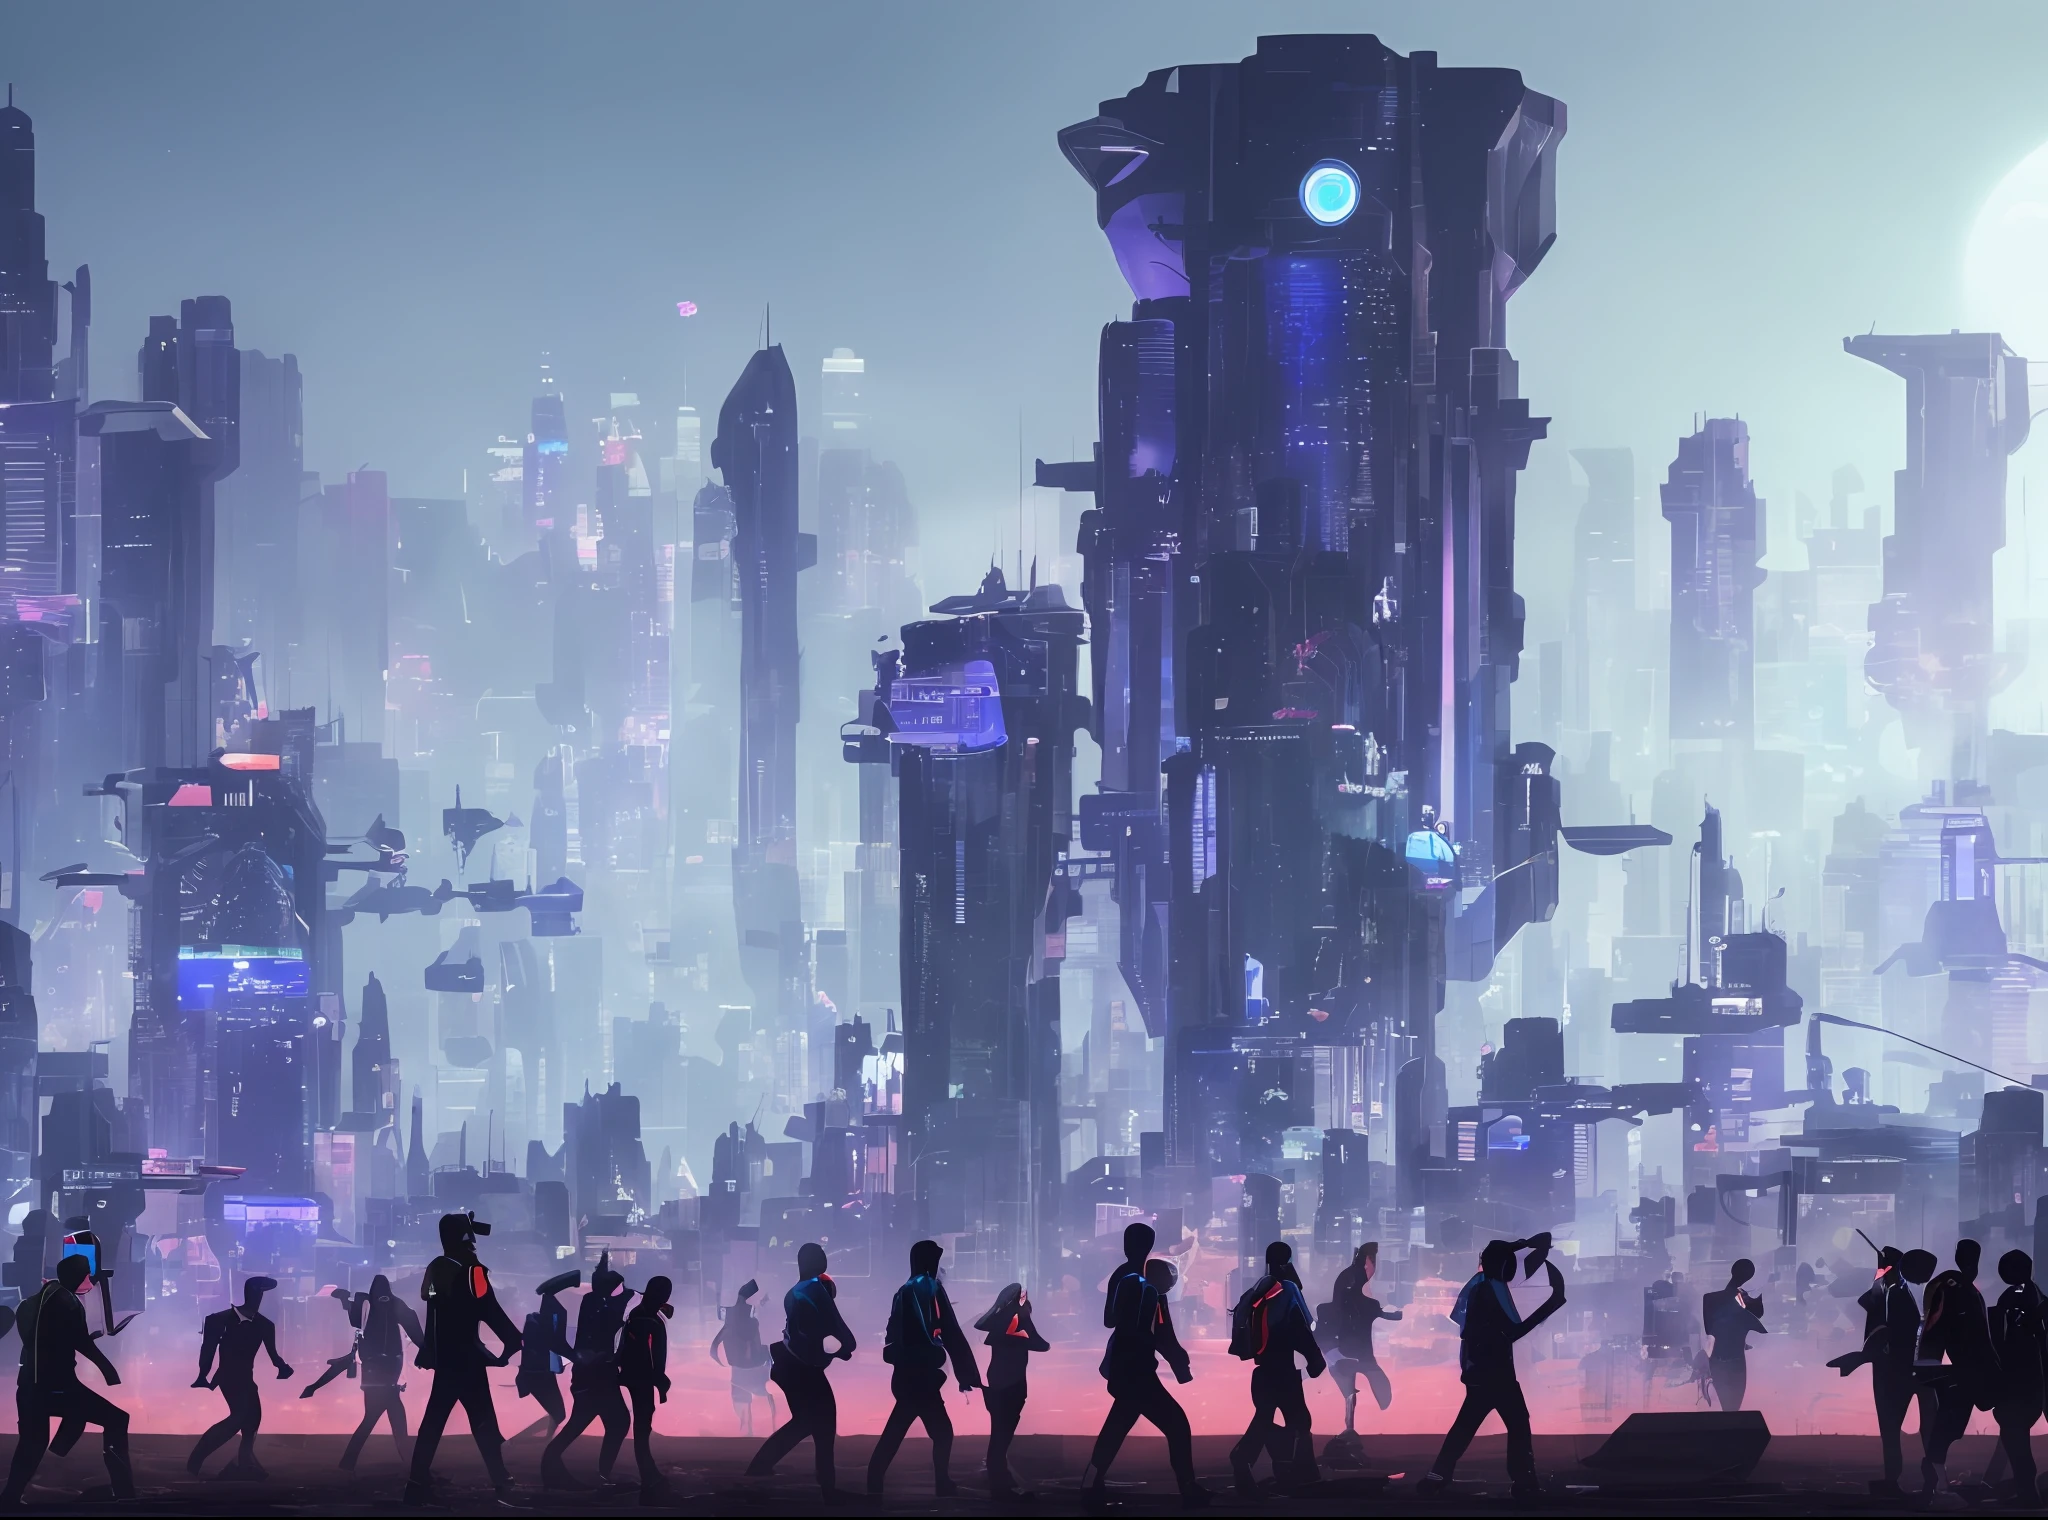 Many aliens with human-like bodies, march in the futuristic cyber city